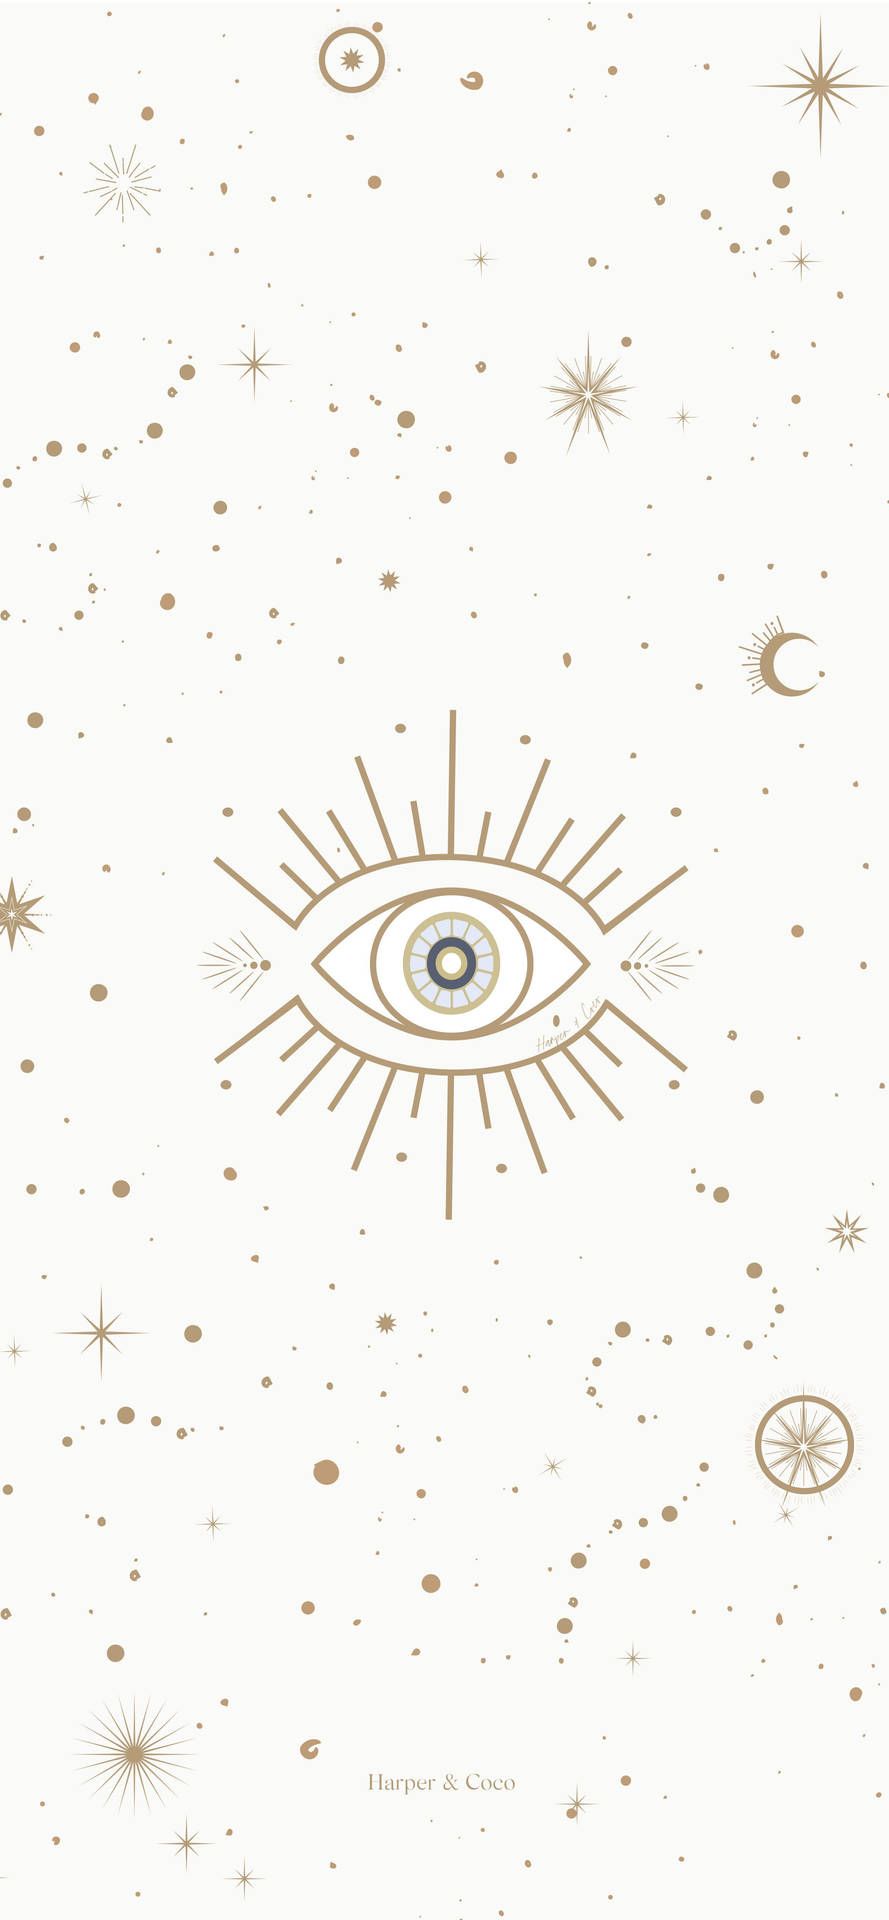 A gold all seeing eye on a white background surrounded by stars - Eyes